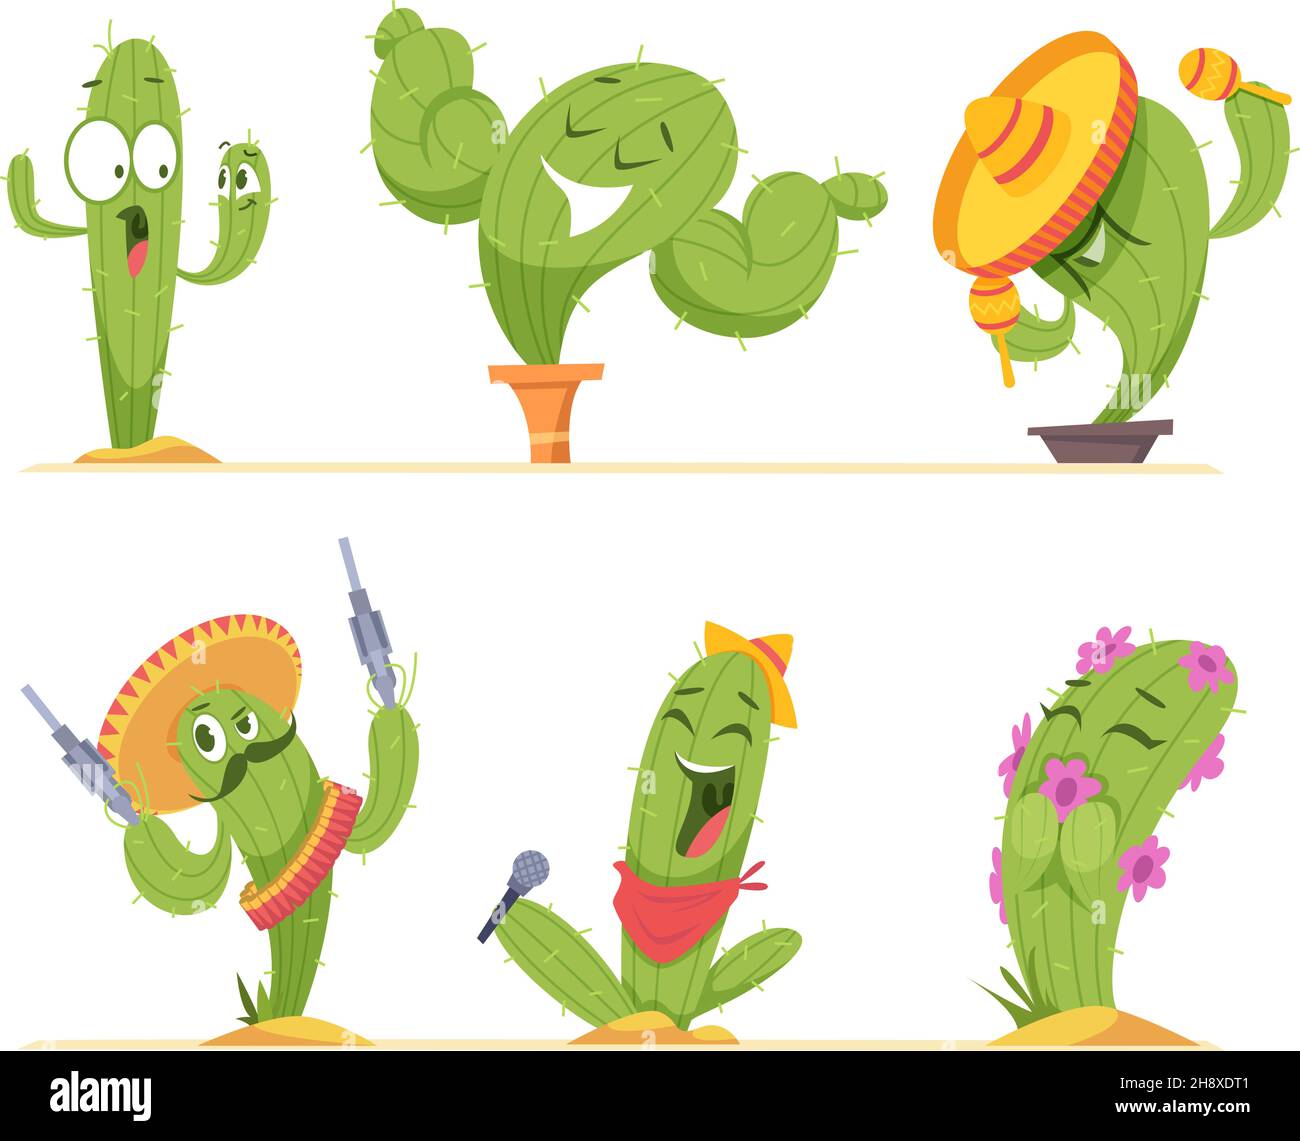 Cactus characters. Mexico authentic plants happy faces in cartoon style exact vector pictures of emoticon of cactus in various poses Stock Vector